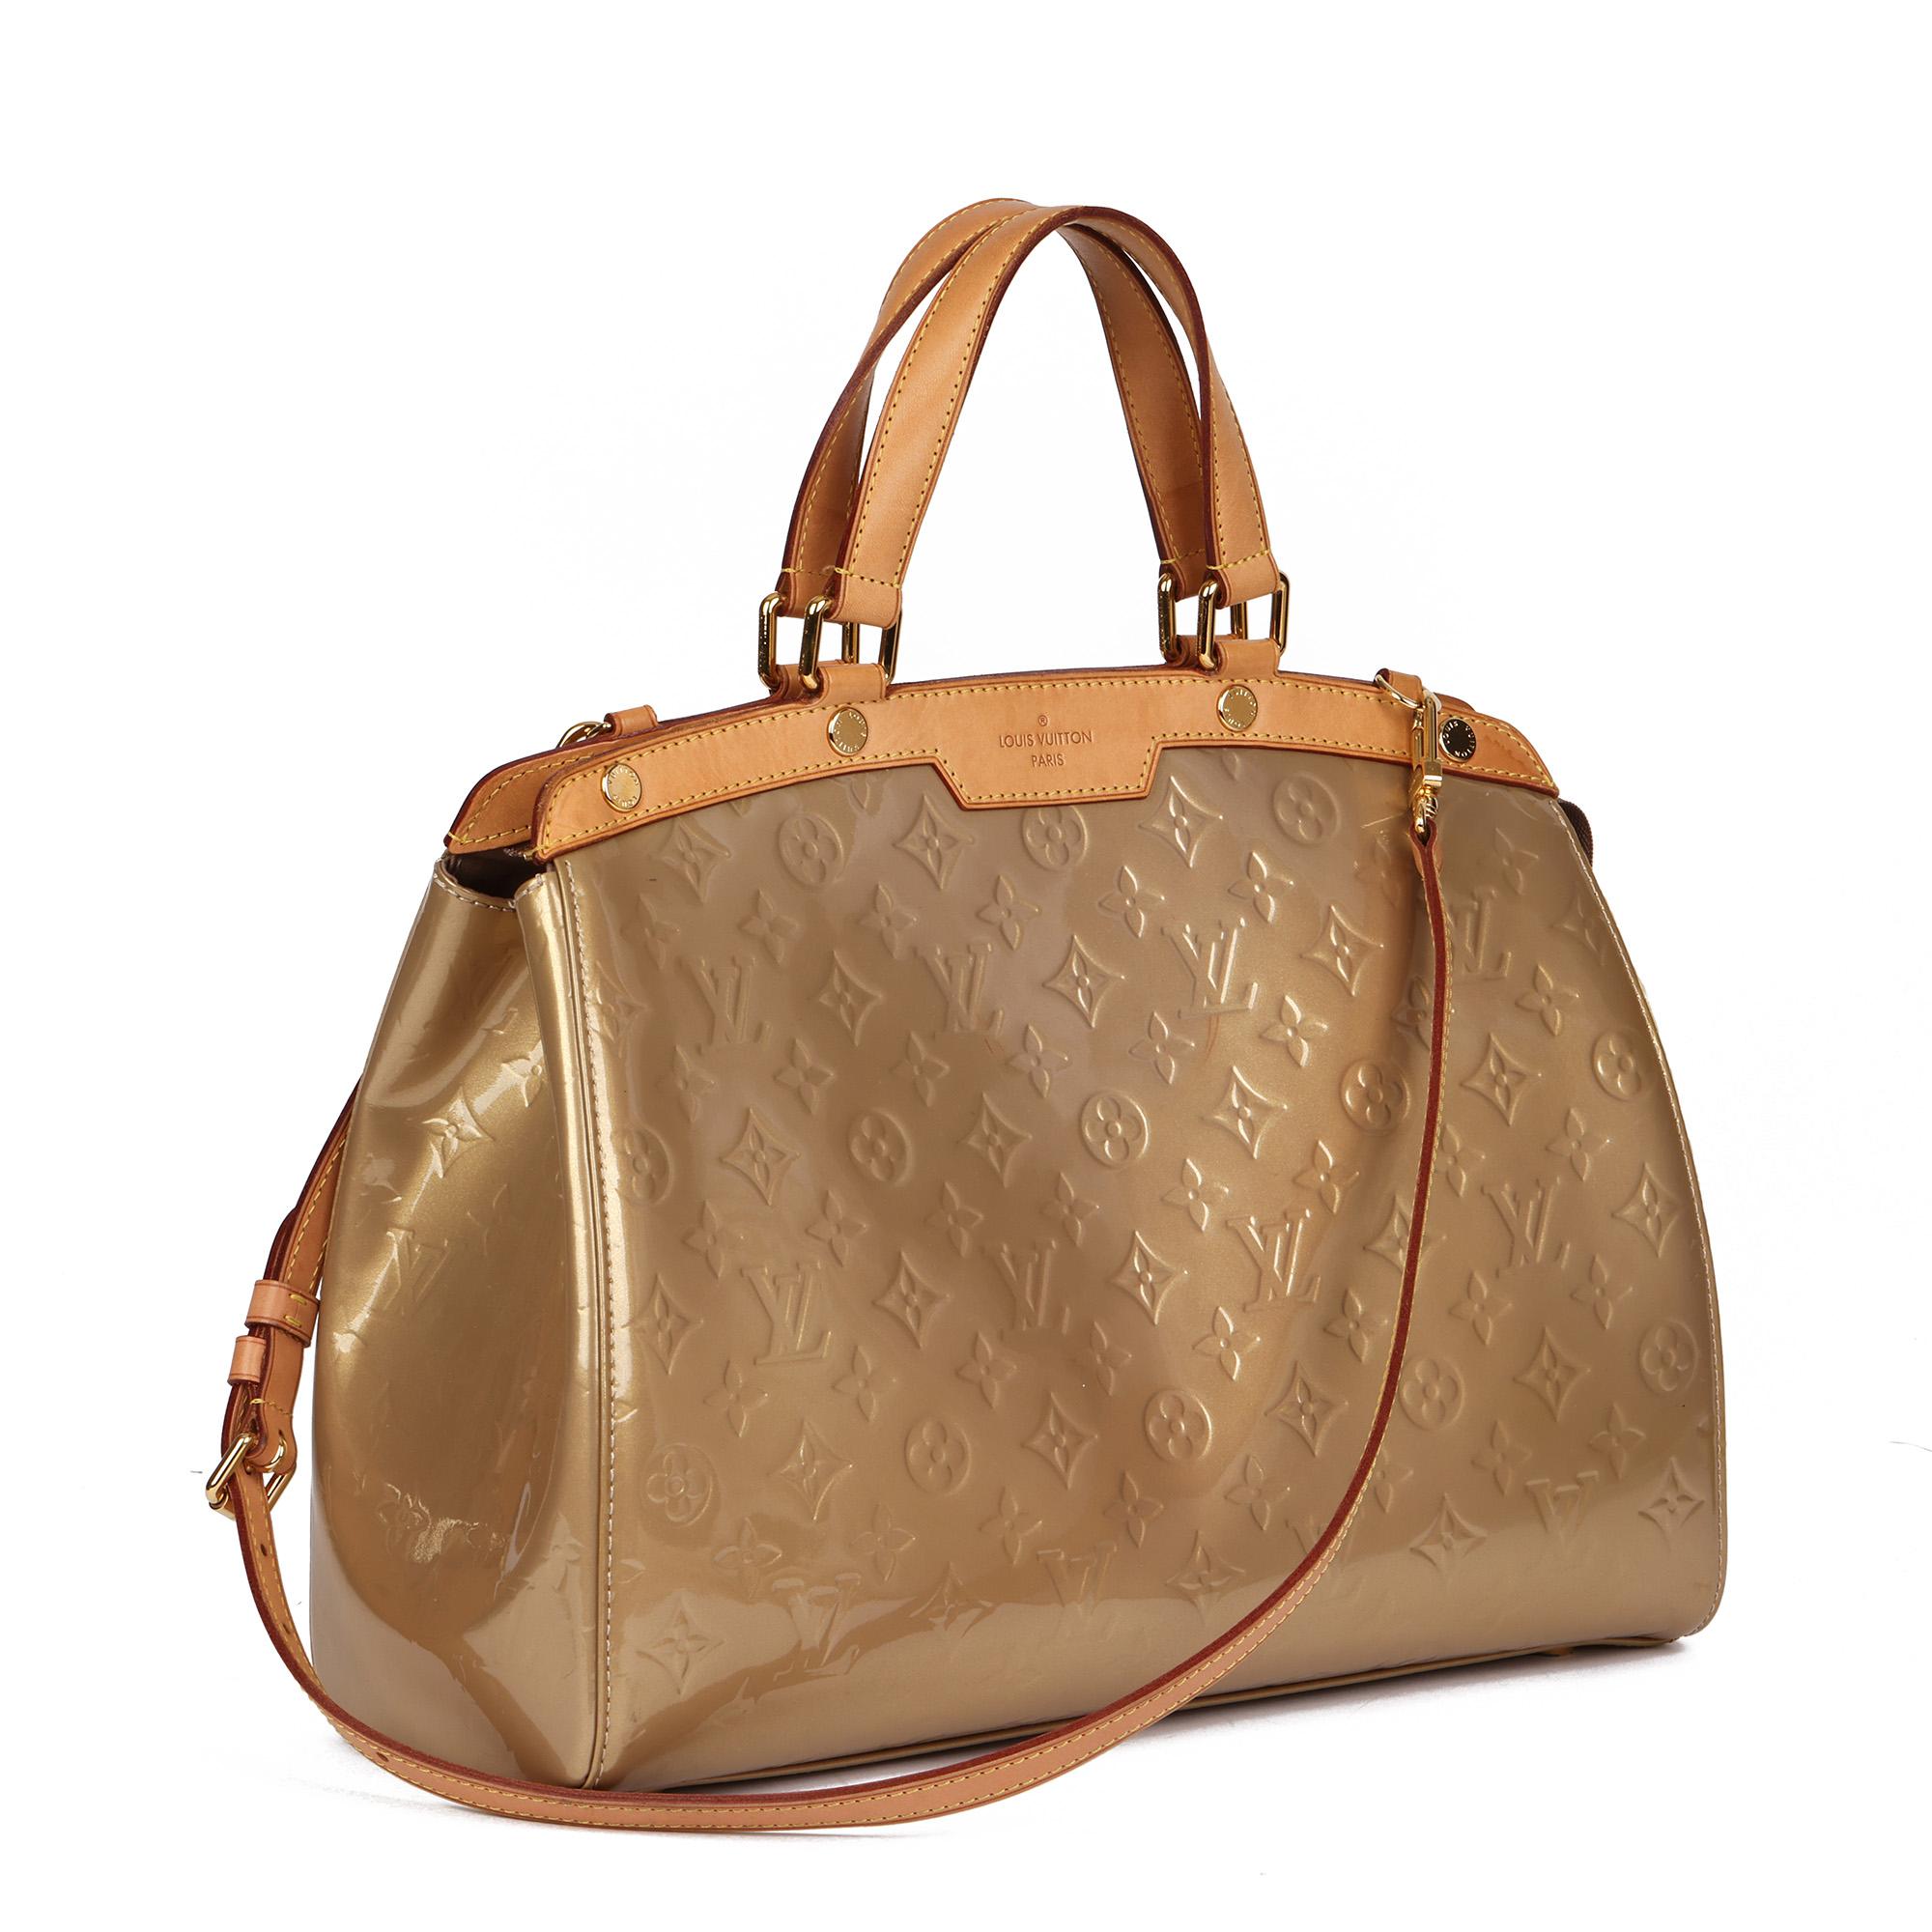 LOUIS VUITTON
Gold Vernis Leather Brea GM

Xupes Reference: CB696
Serial Number: SR2142
Age (Circa): 2012
Accompanied By: Louis Vuitton Dust Bag, Shoulder Strap
Authenticity Details: Date Stamp (Made in France)
Gender: Ladies
Type: Tote,